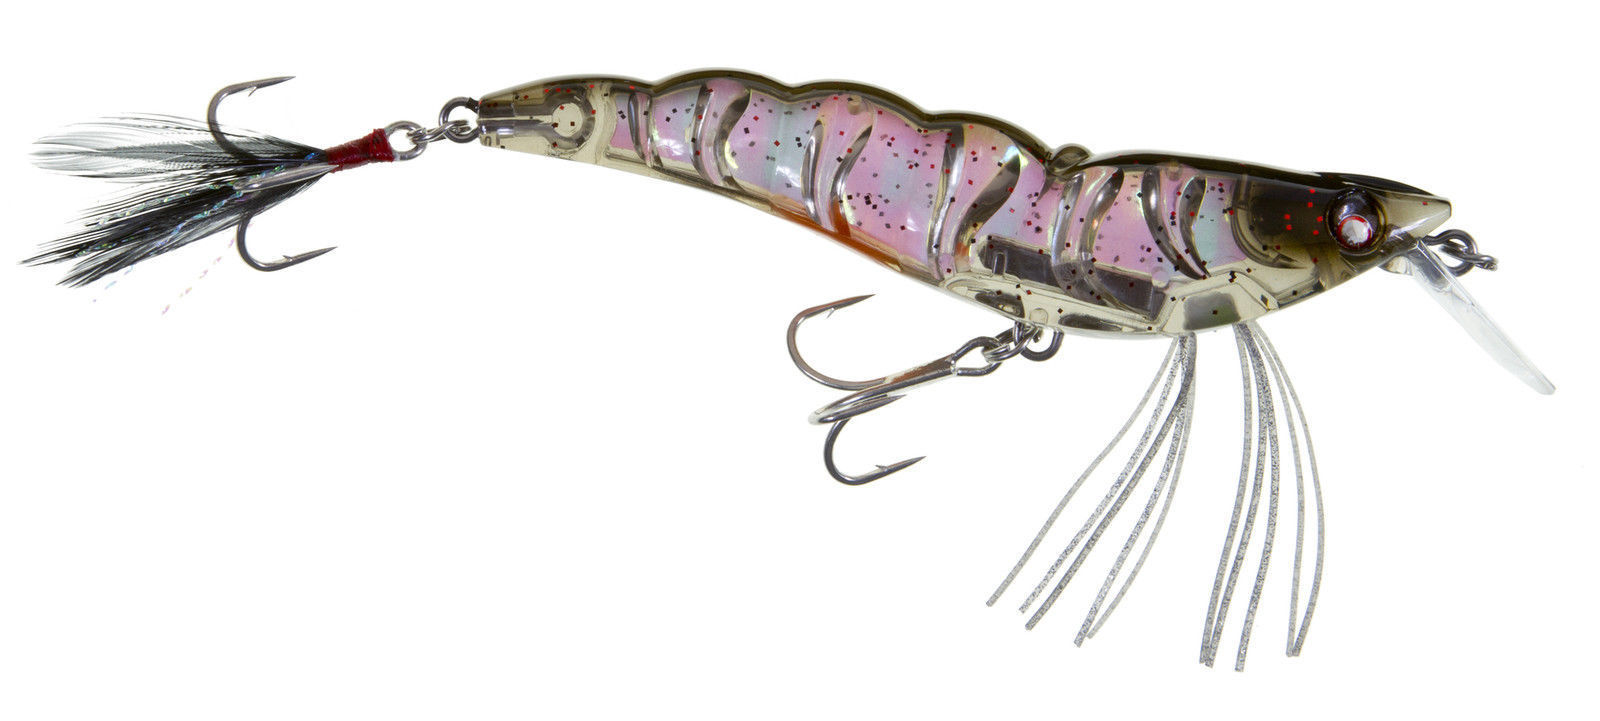  Yo-Zuri R1161-HGS Crystal 3D Shrimp Slow Sinking Lure,  Holographic Ghost Shrimp : Sports & Outdoors